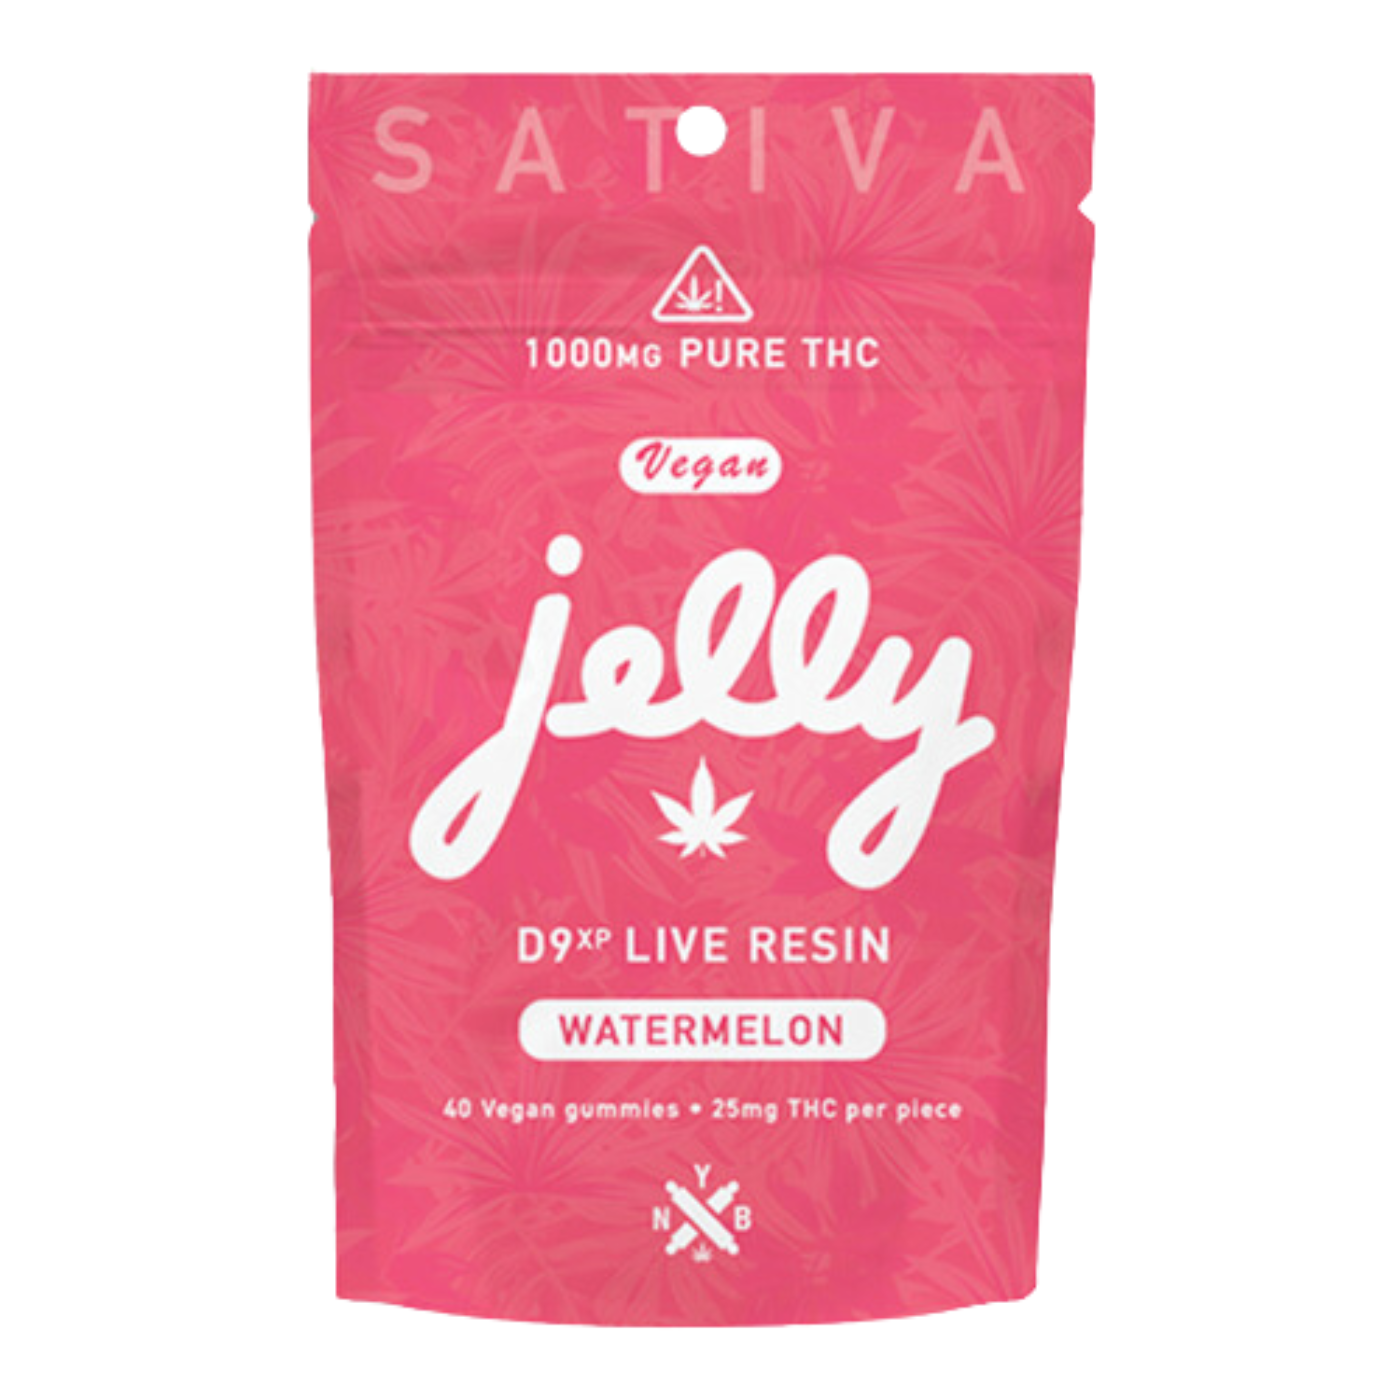 Jelly | Live Resin Delta 9 THC Gummies - 1000mg Best Price